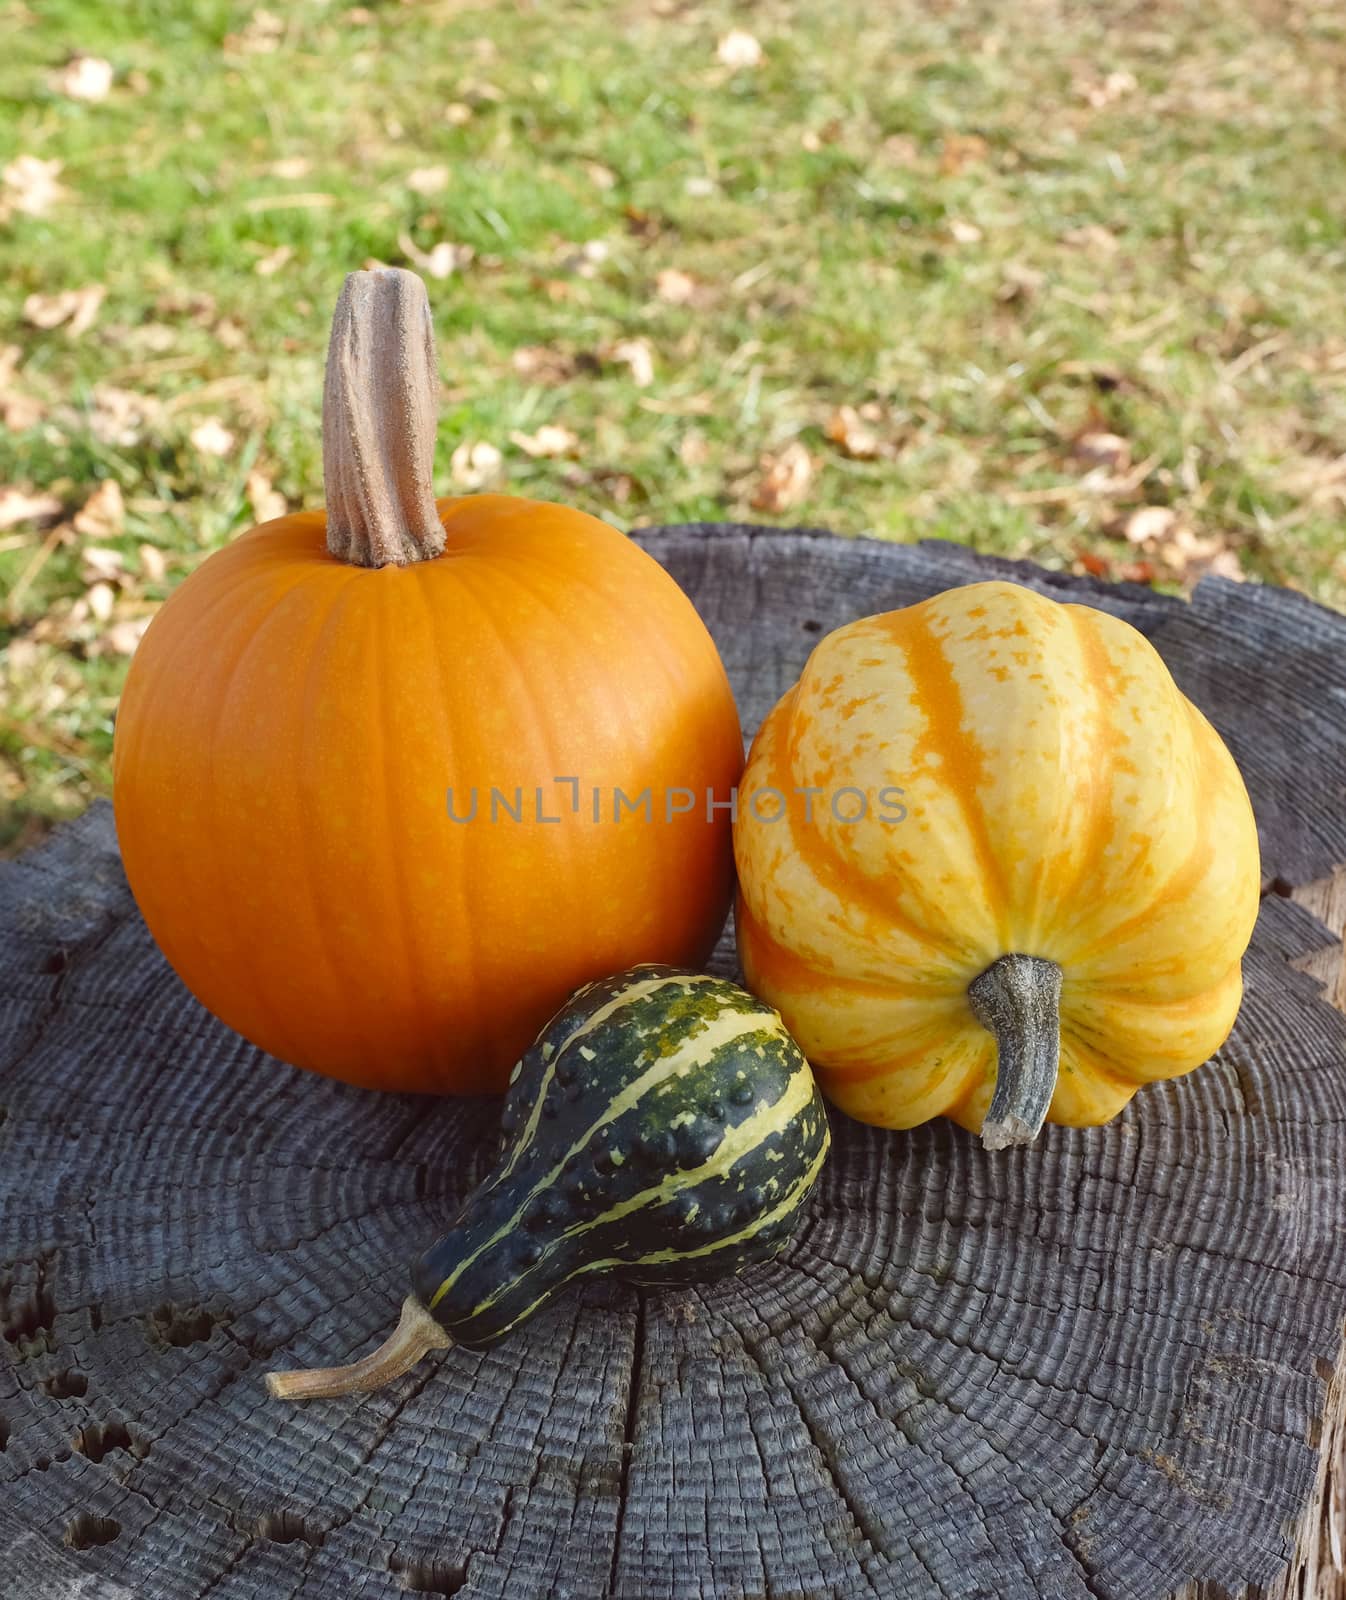 Orange pumpkin, yellow Festival squash and green ornamental gourd on a tree stump, grass and autumn leaves beyond